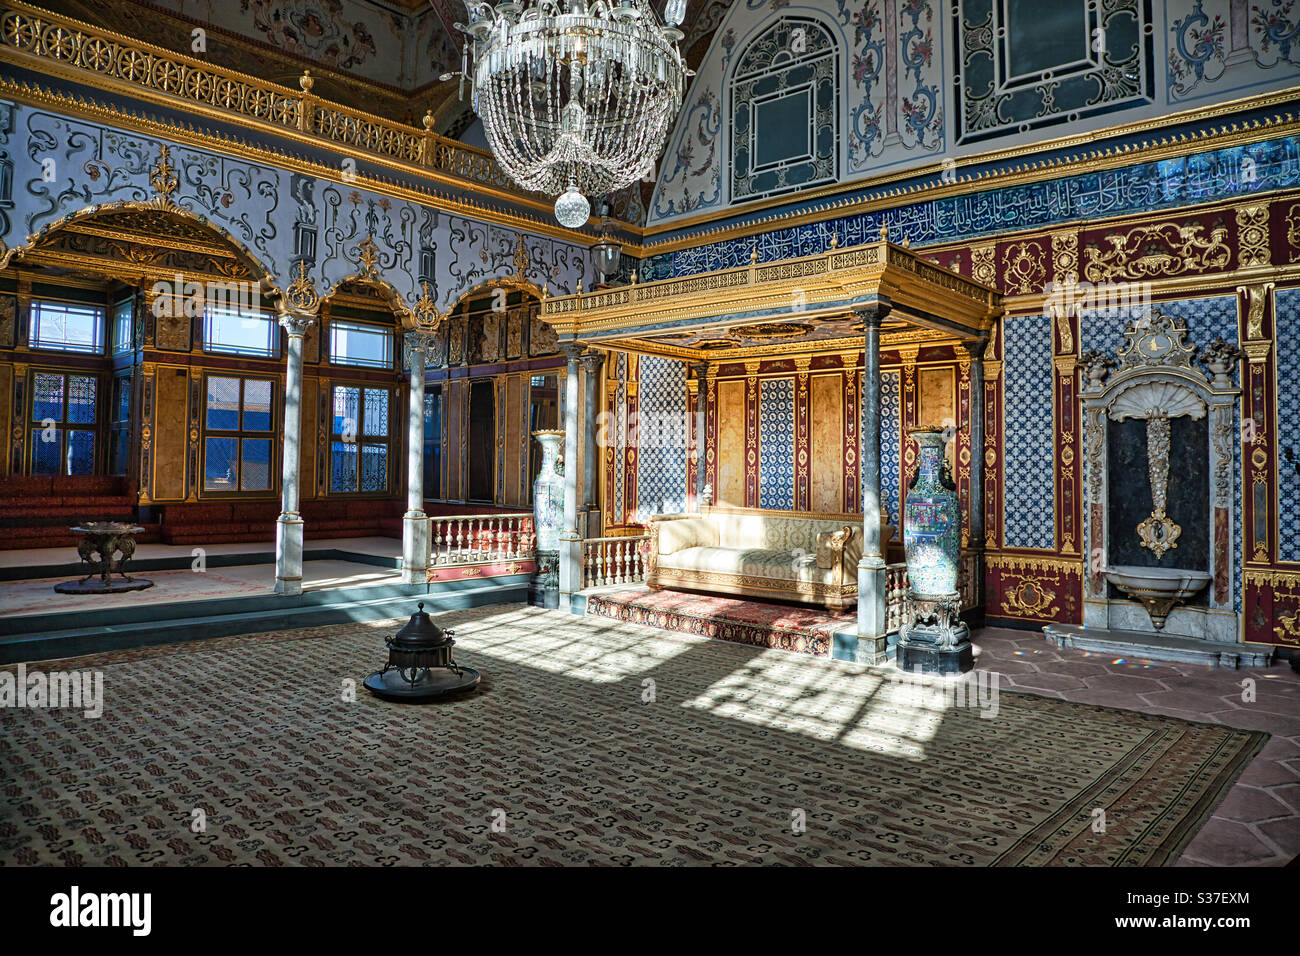 The Harem in Topkapi Palace, Istanbul, Turkey. The palace was the official residential place of the Ottoman Sultans. The Harem consisted of apartments where the sultans lived with their families. Stock Photo